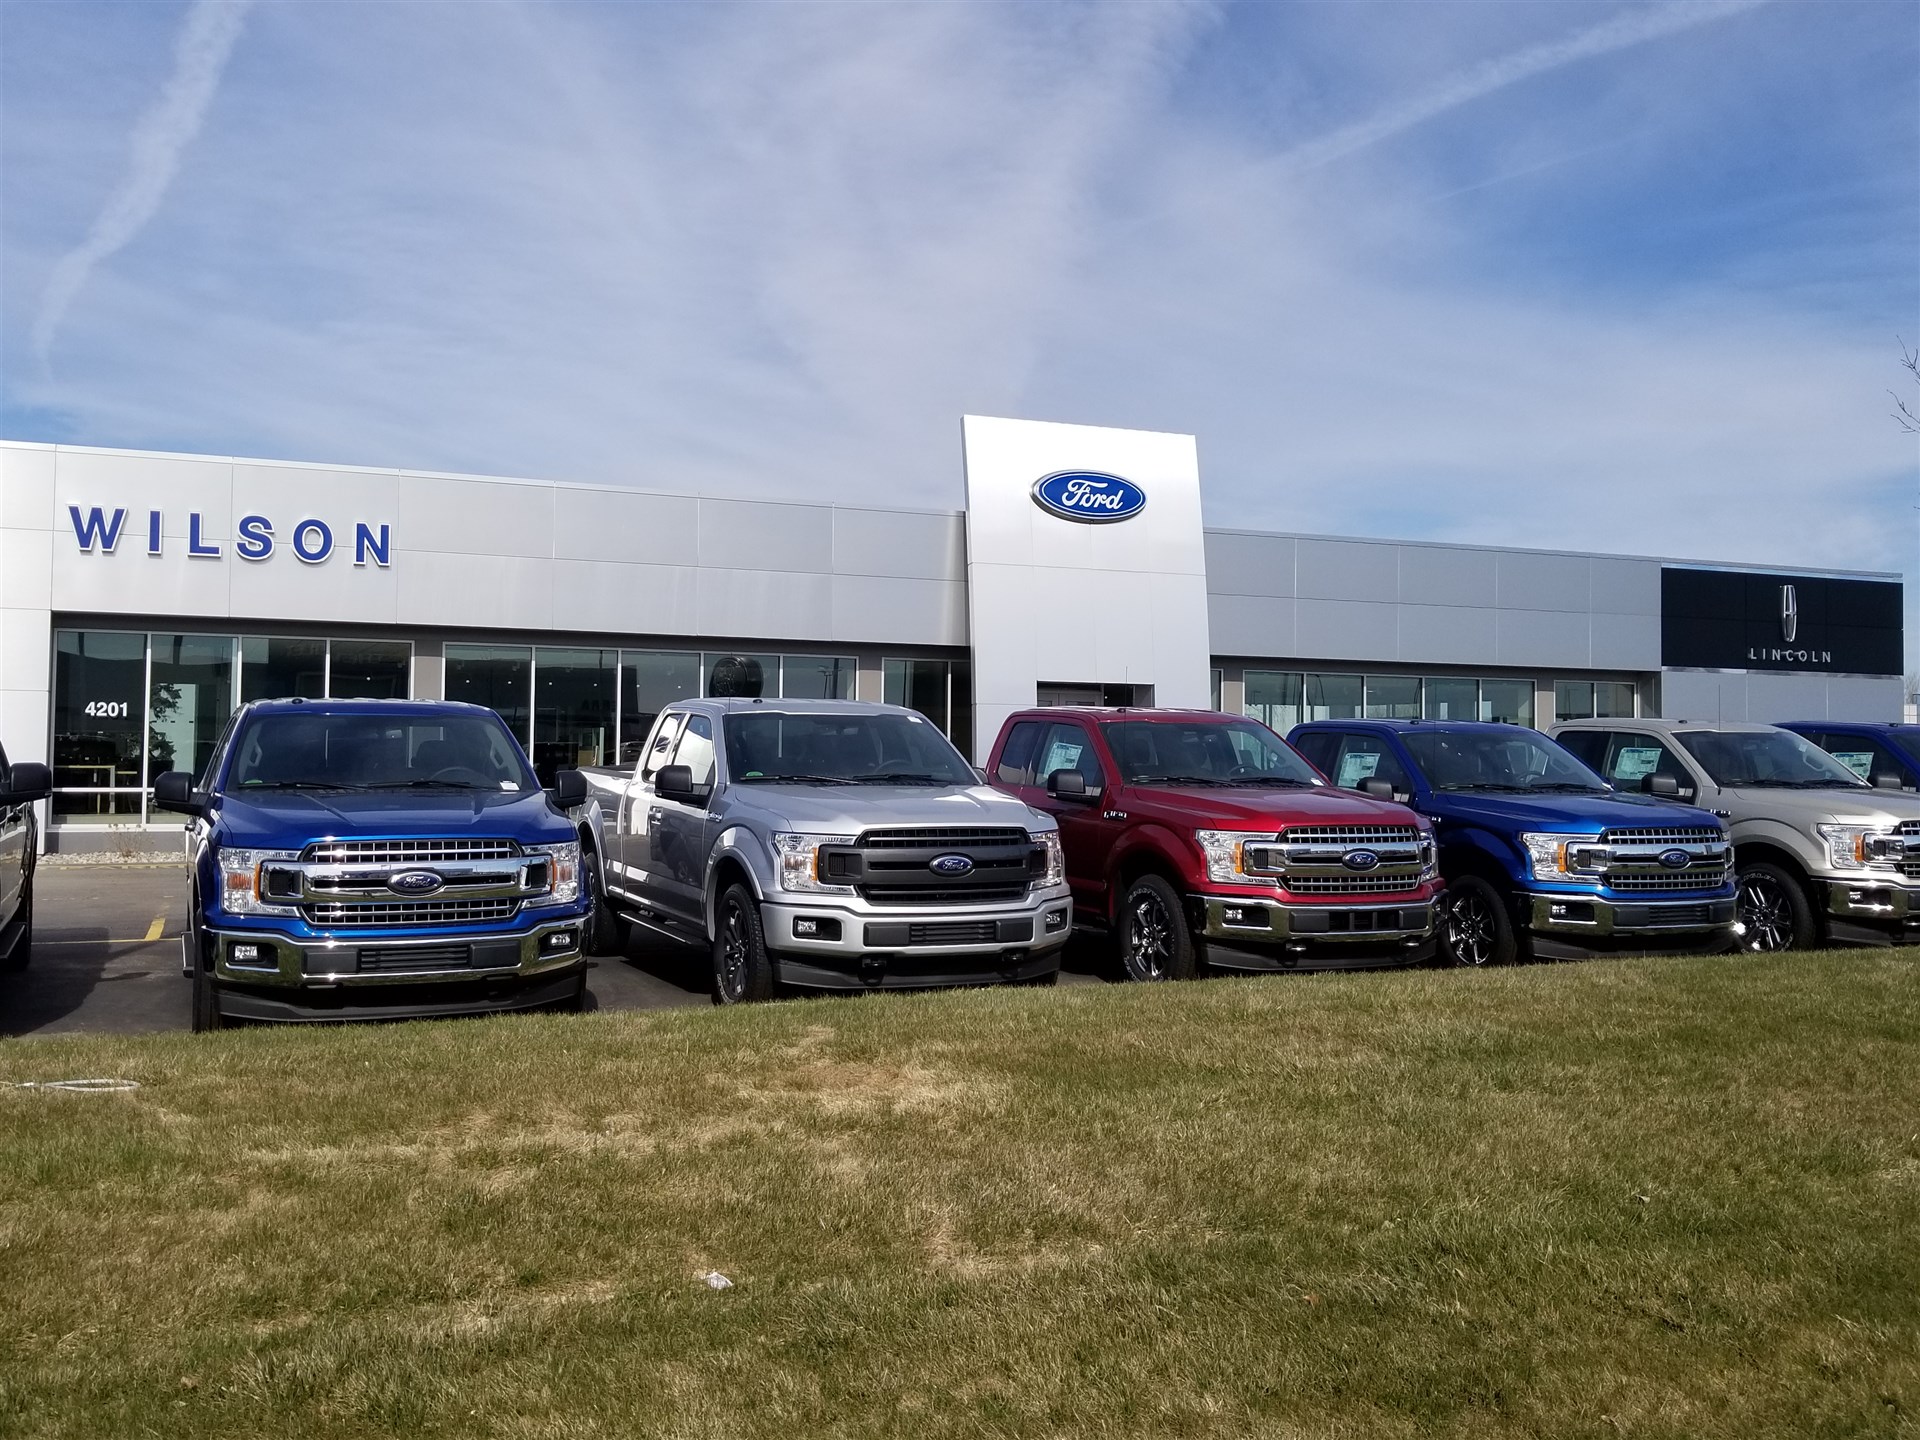 Wilson Ford Lincoln